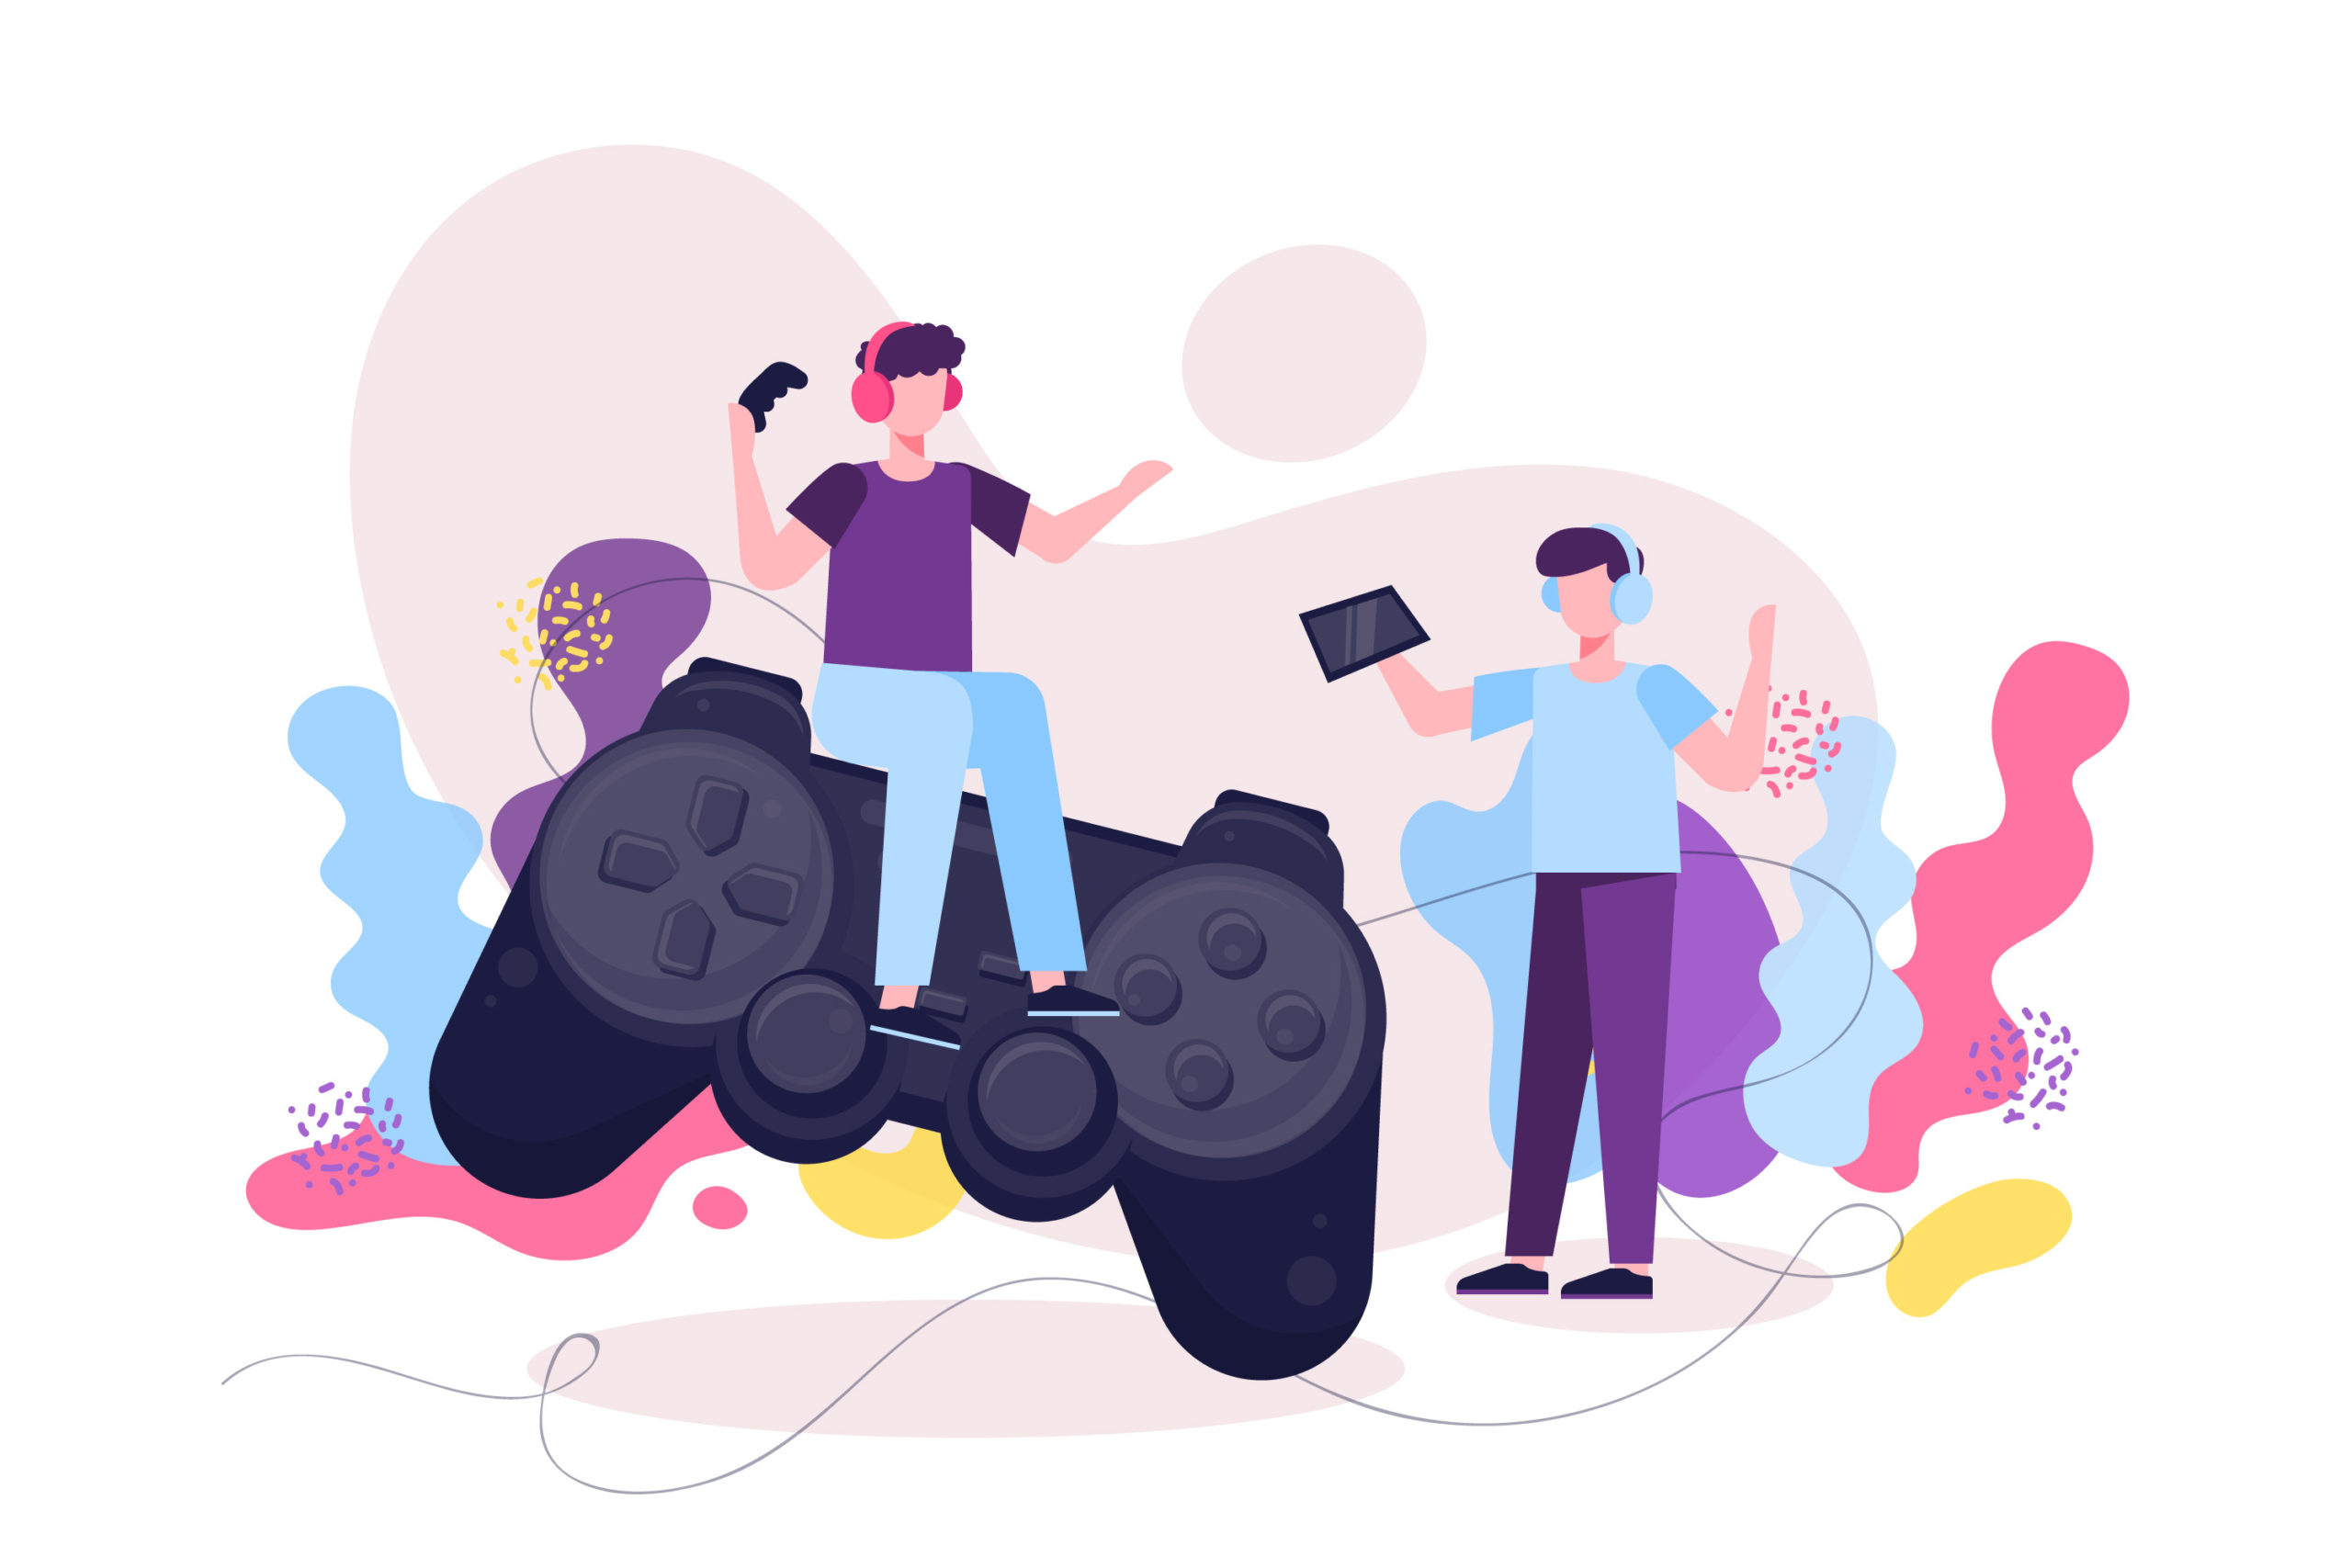 9 More Online Games For Virtual Gatherings, by Kevin Lin